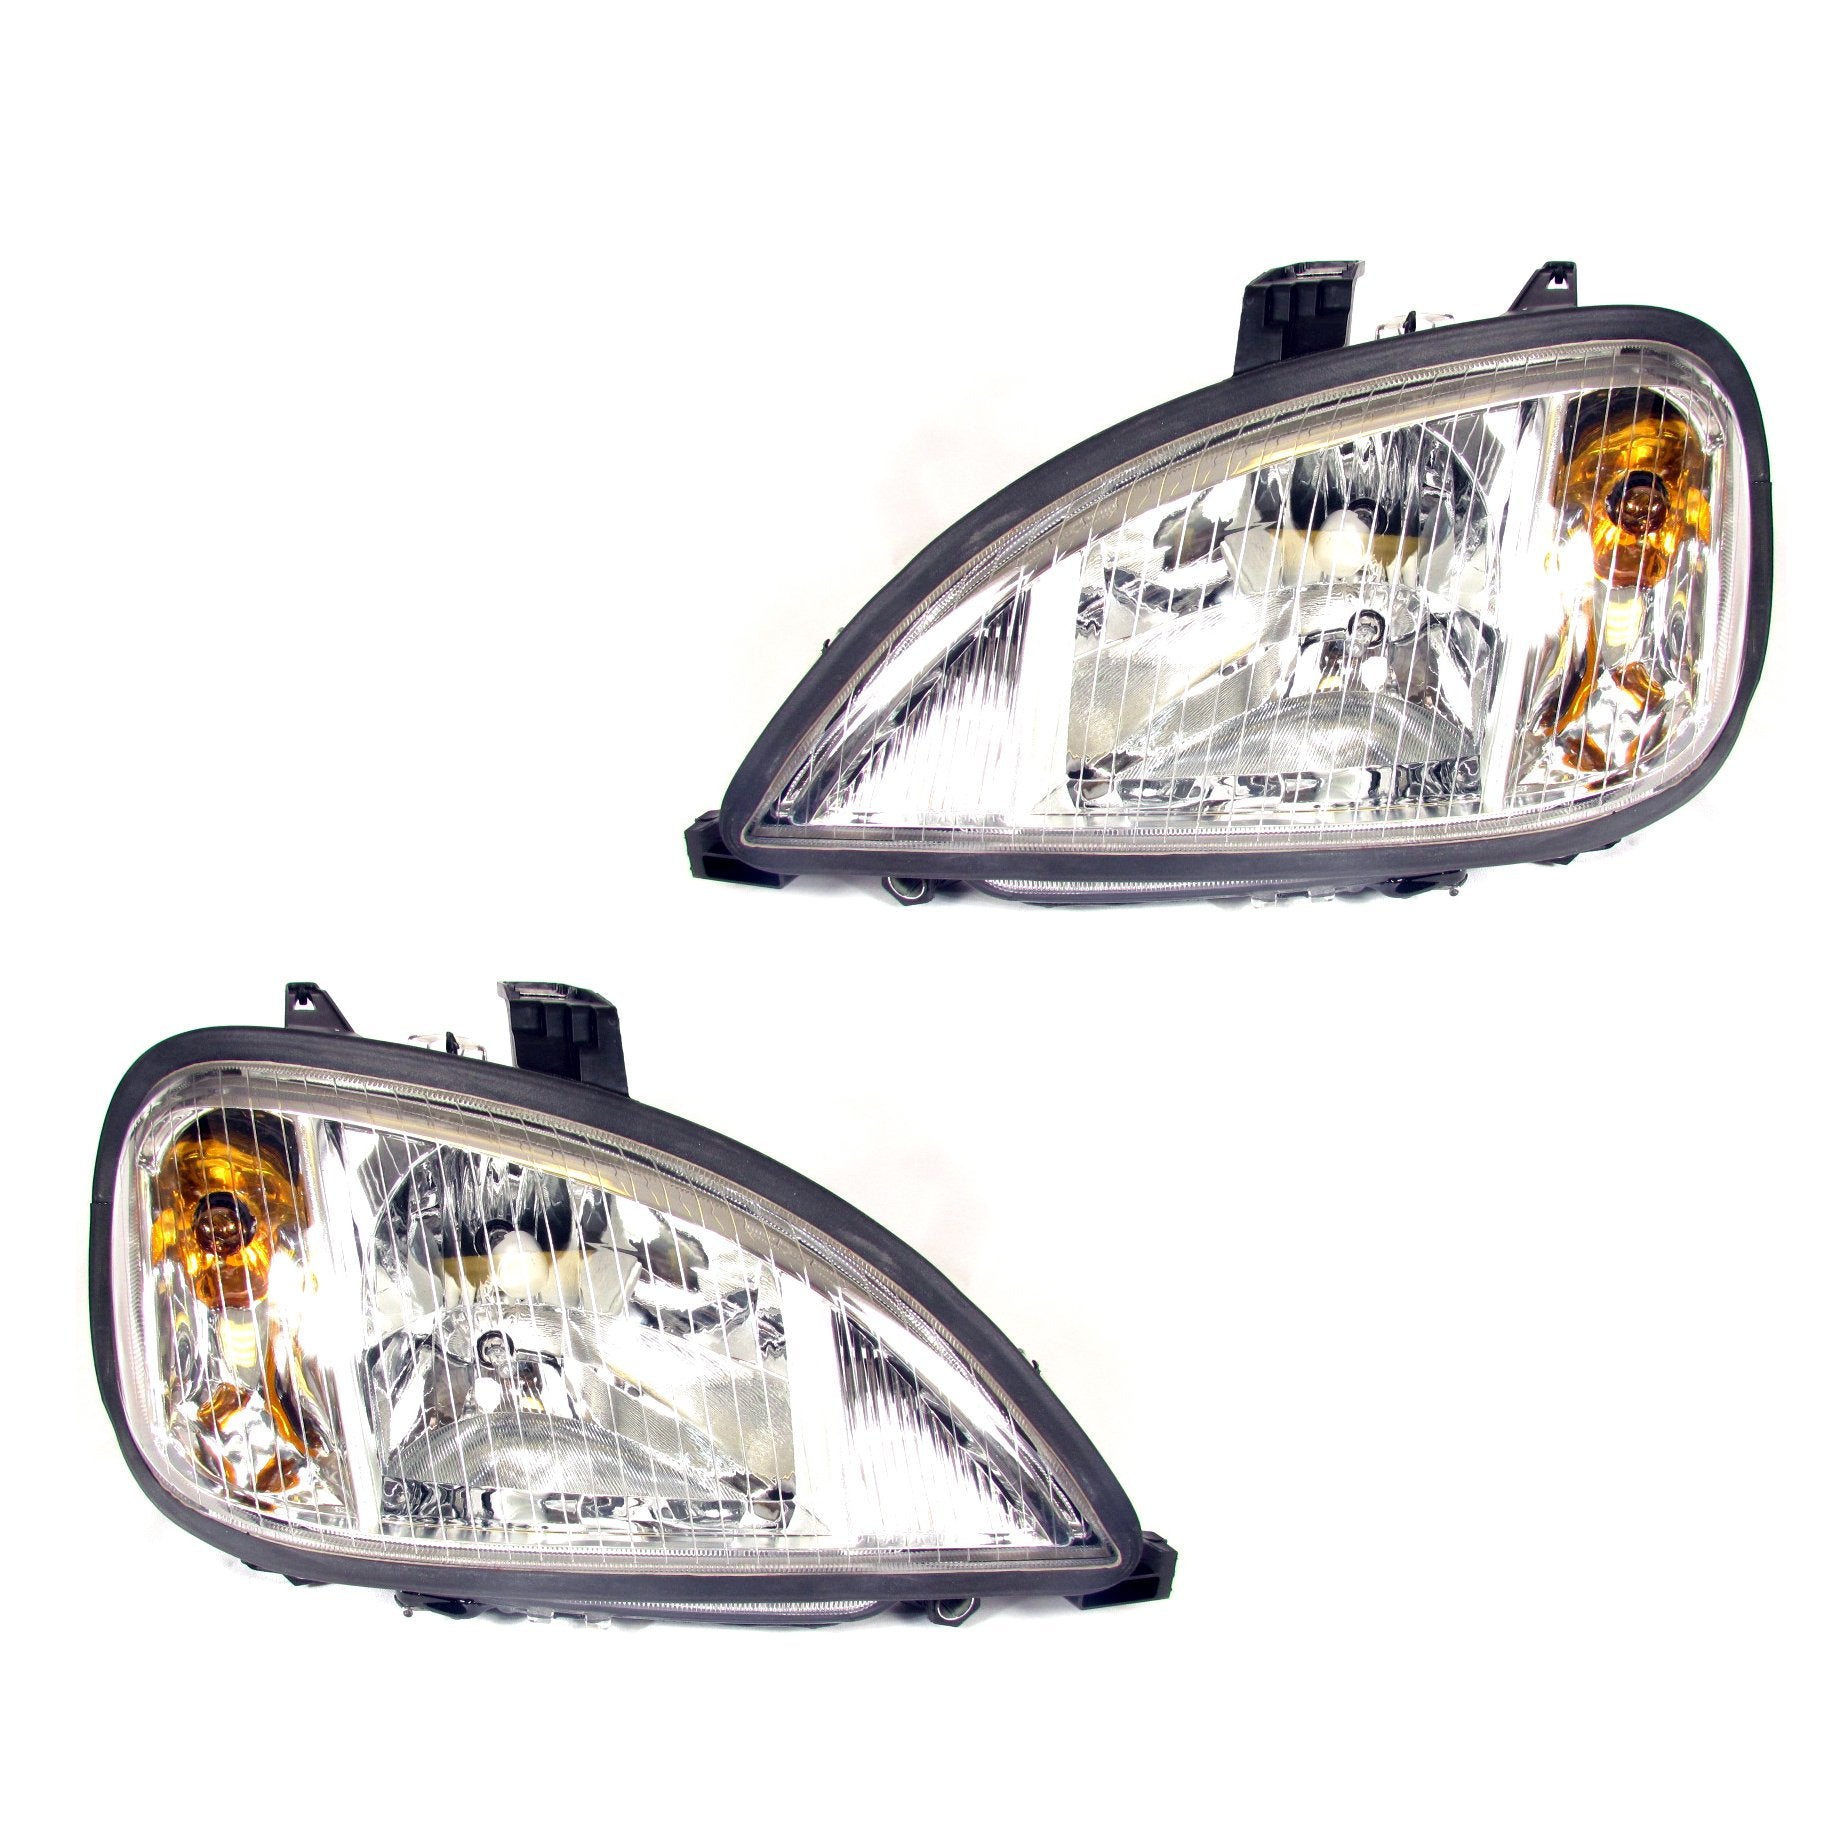 Fortpro Headlights For Freightliner Columbia replaces A06-75737-004,  A06-75737-005